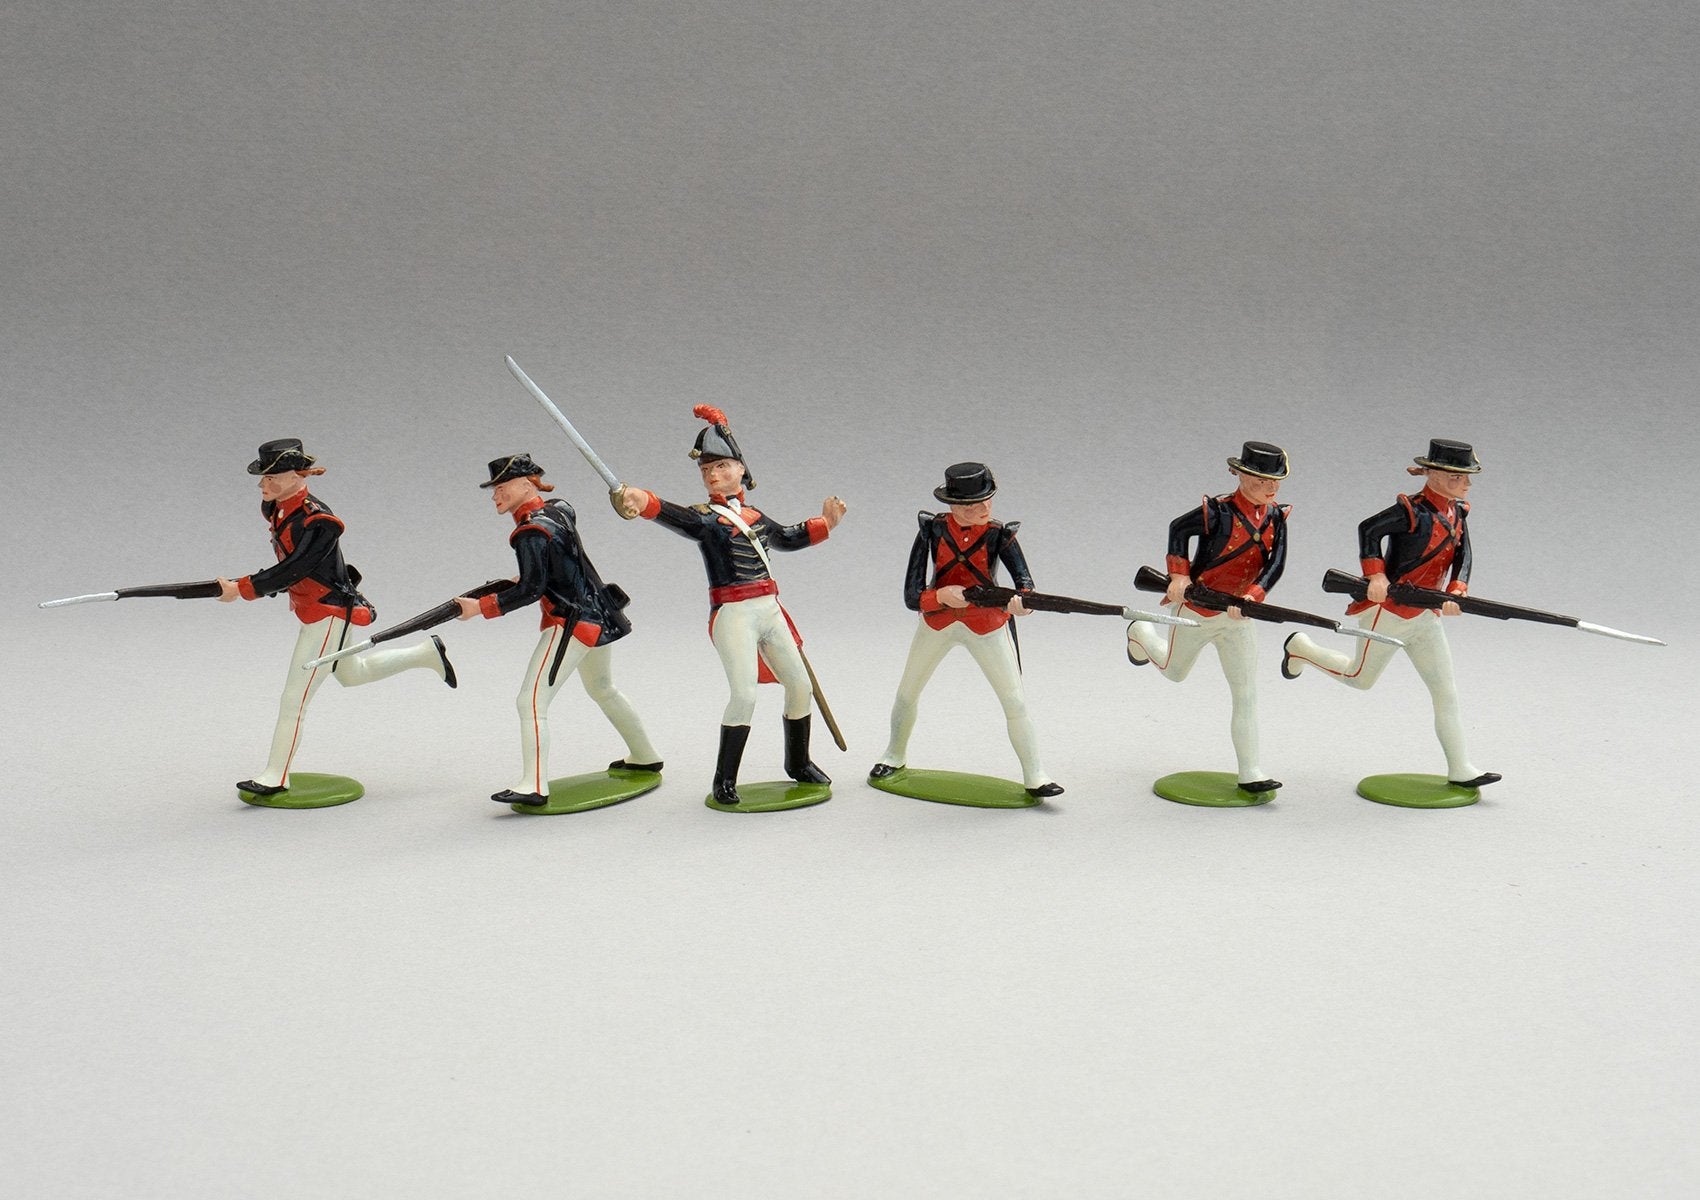 Set X3 Marines at Tripoli, 1805 | US Navy Infantry | Officers & Men | Single mounted cavalryman with rifle and sabre, scarlet shako, sky blue jacket and white pelisse | Tripoli | © Imperial Productions | Sculpt by David Cowe